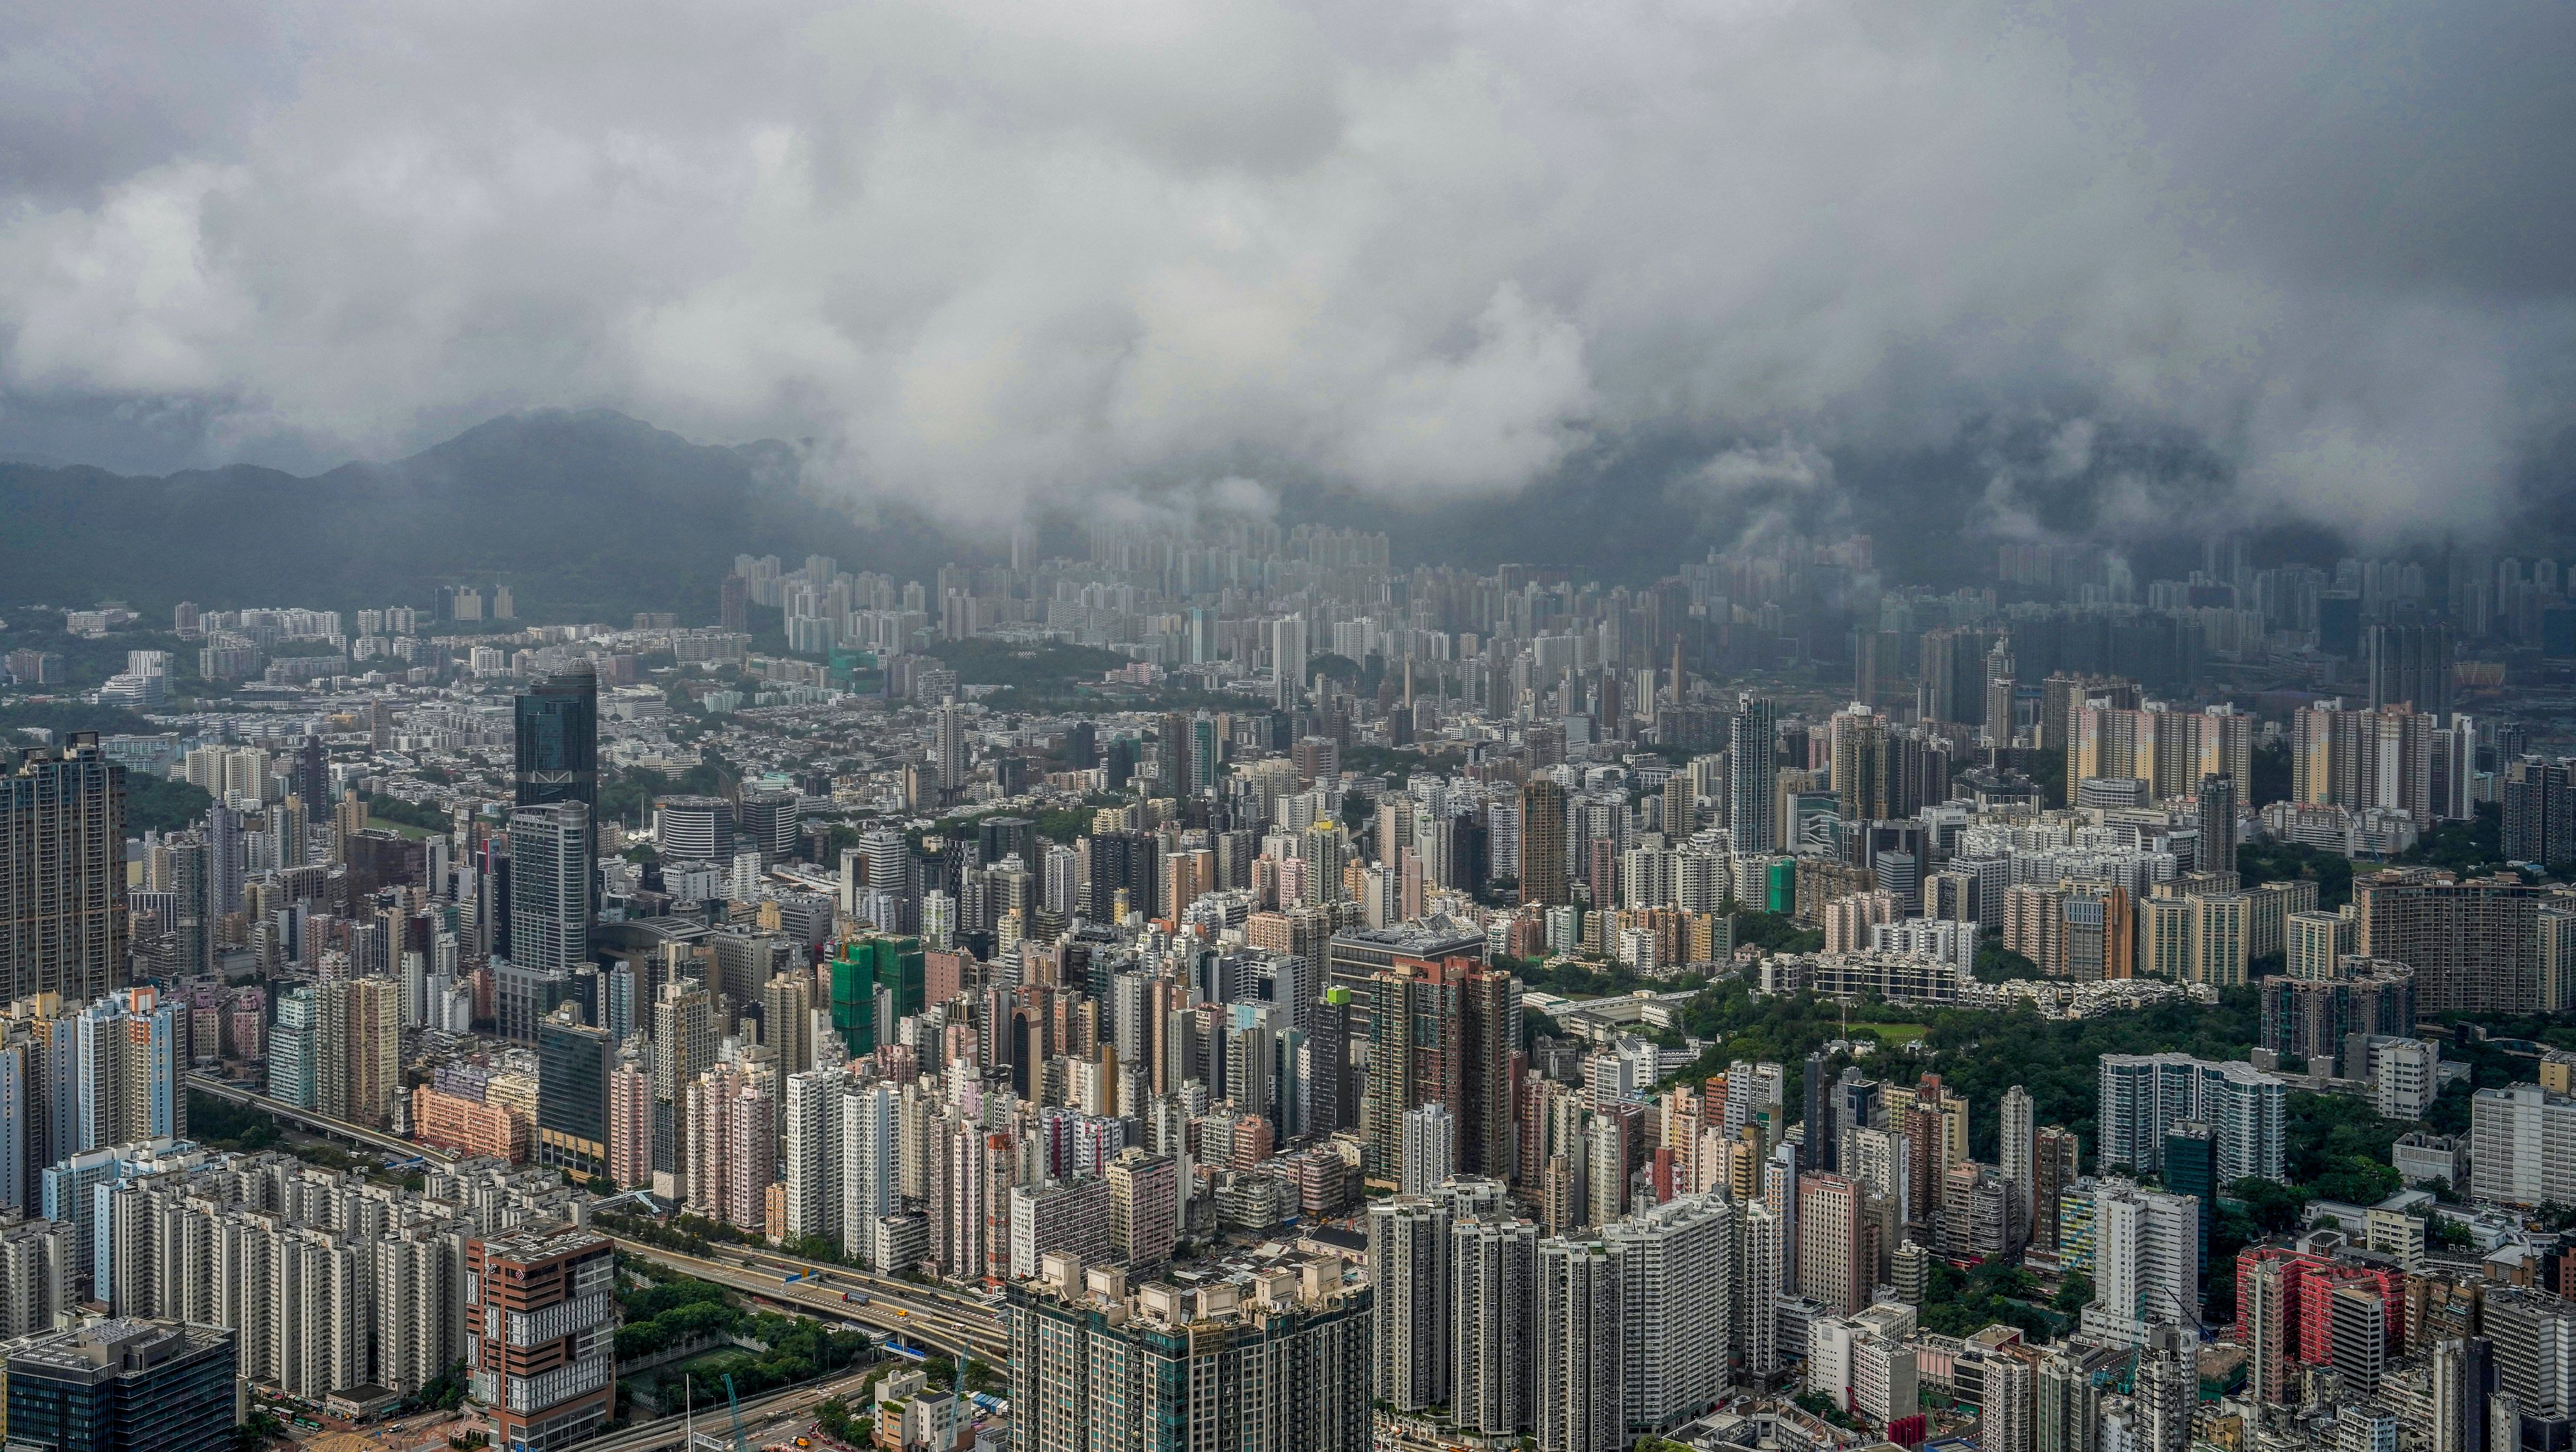 Hong Kong’s Kowloon peninsula. It ‘is well positioned to prudently capture any opportunities in Hong Kong and the mainland’, K Wah says. Photo: Elson Li